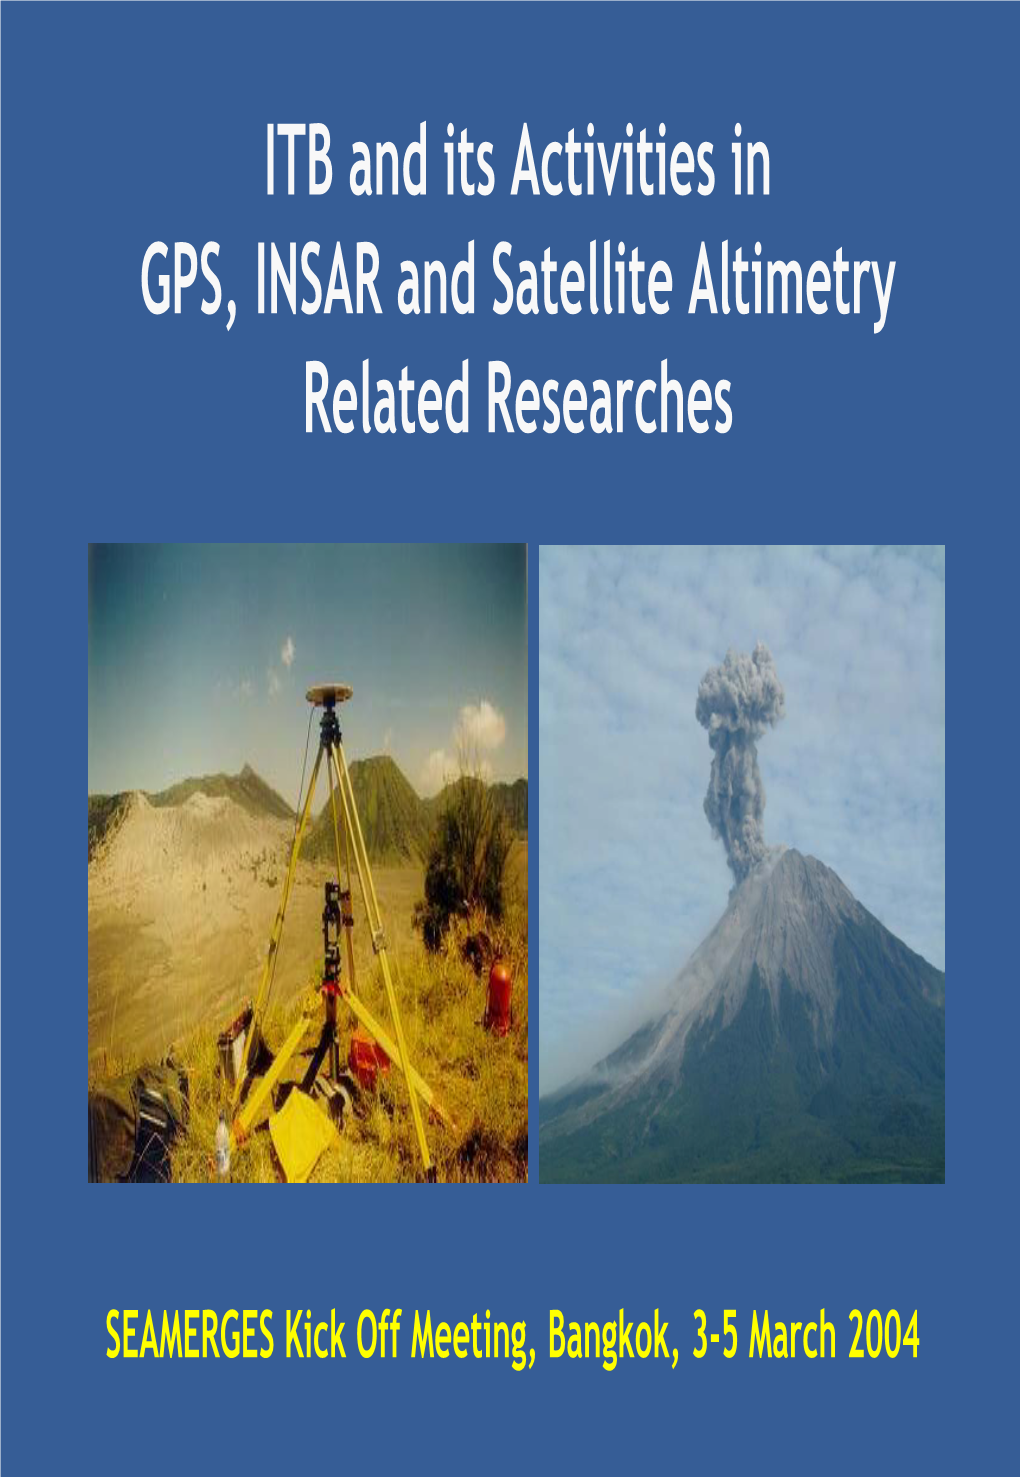 ITB and Its Activities in GPS, INSAR and Satellite Altimetry Related Researches